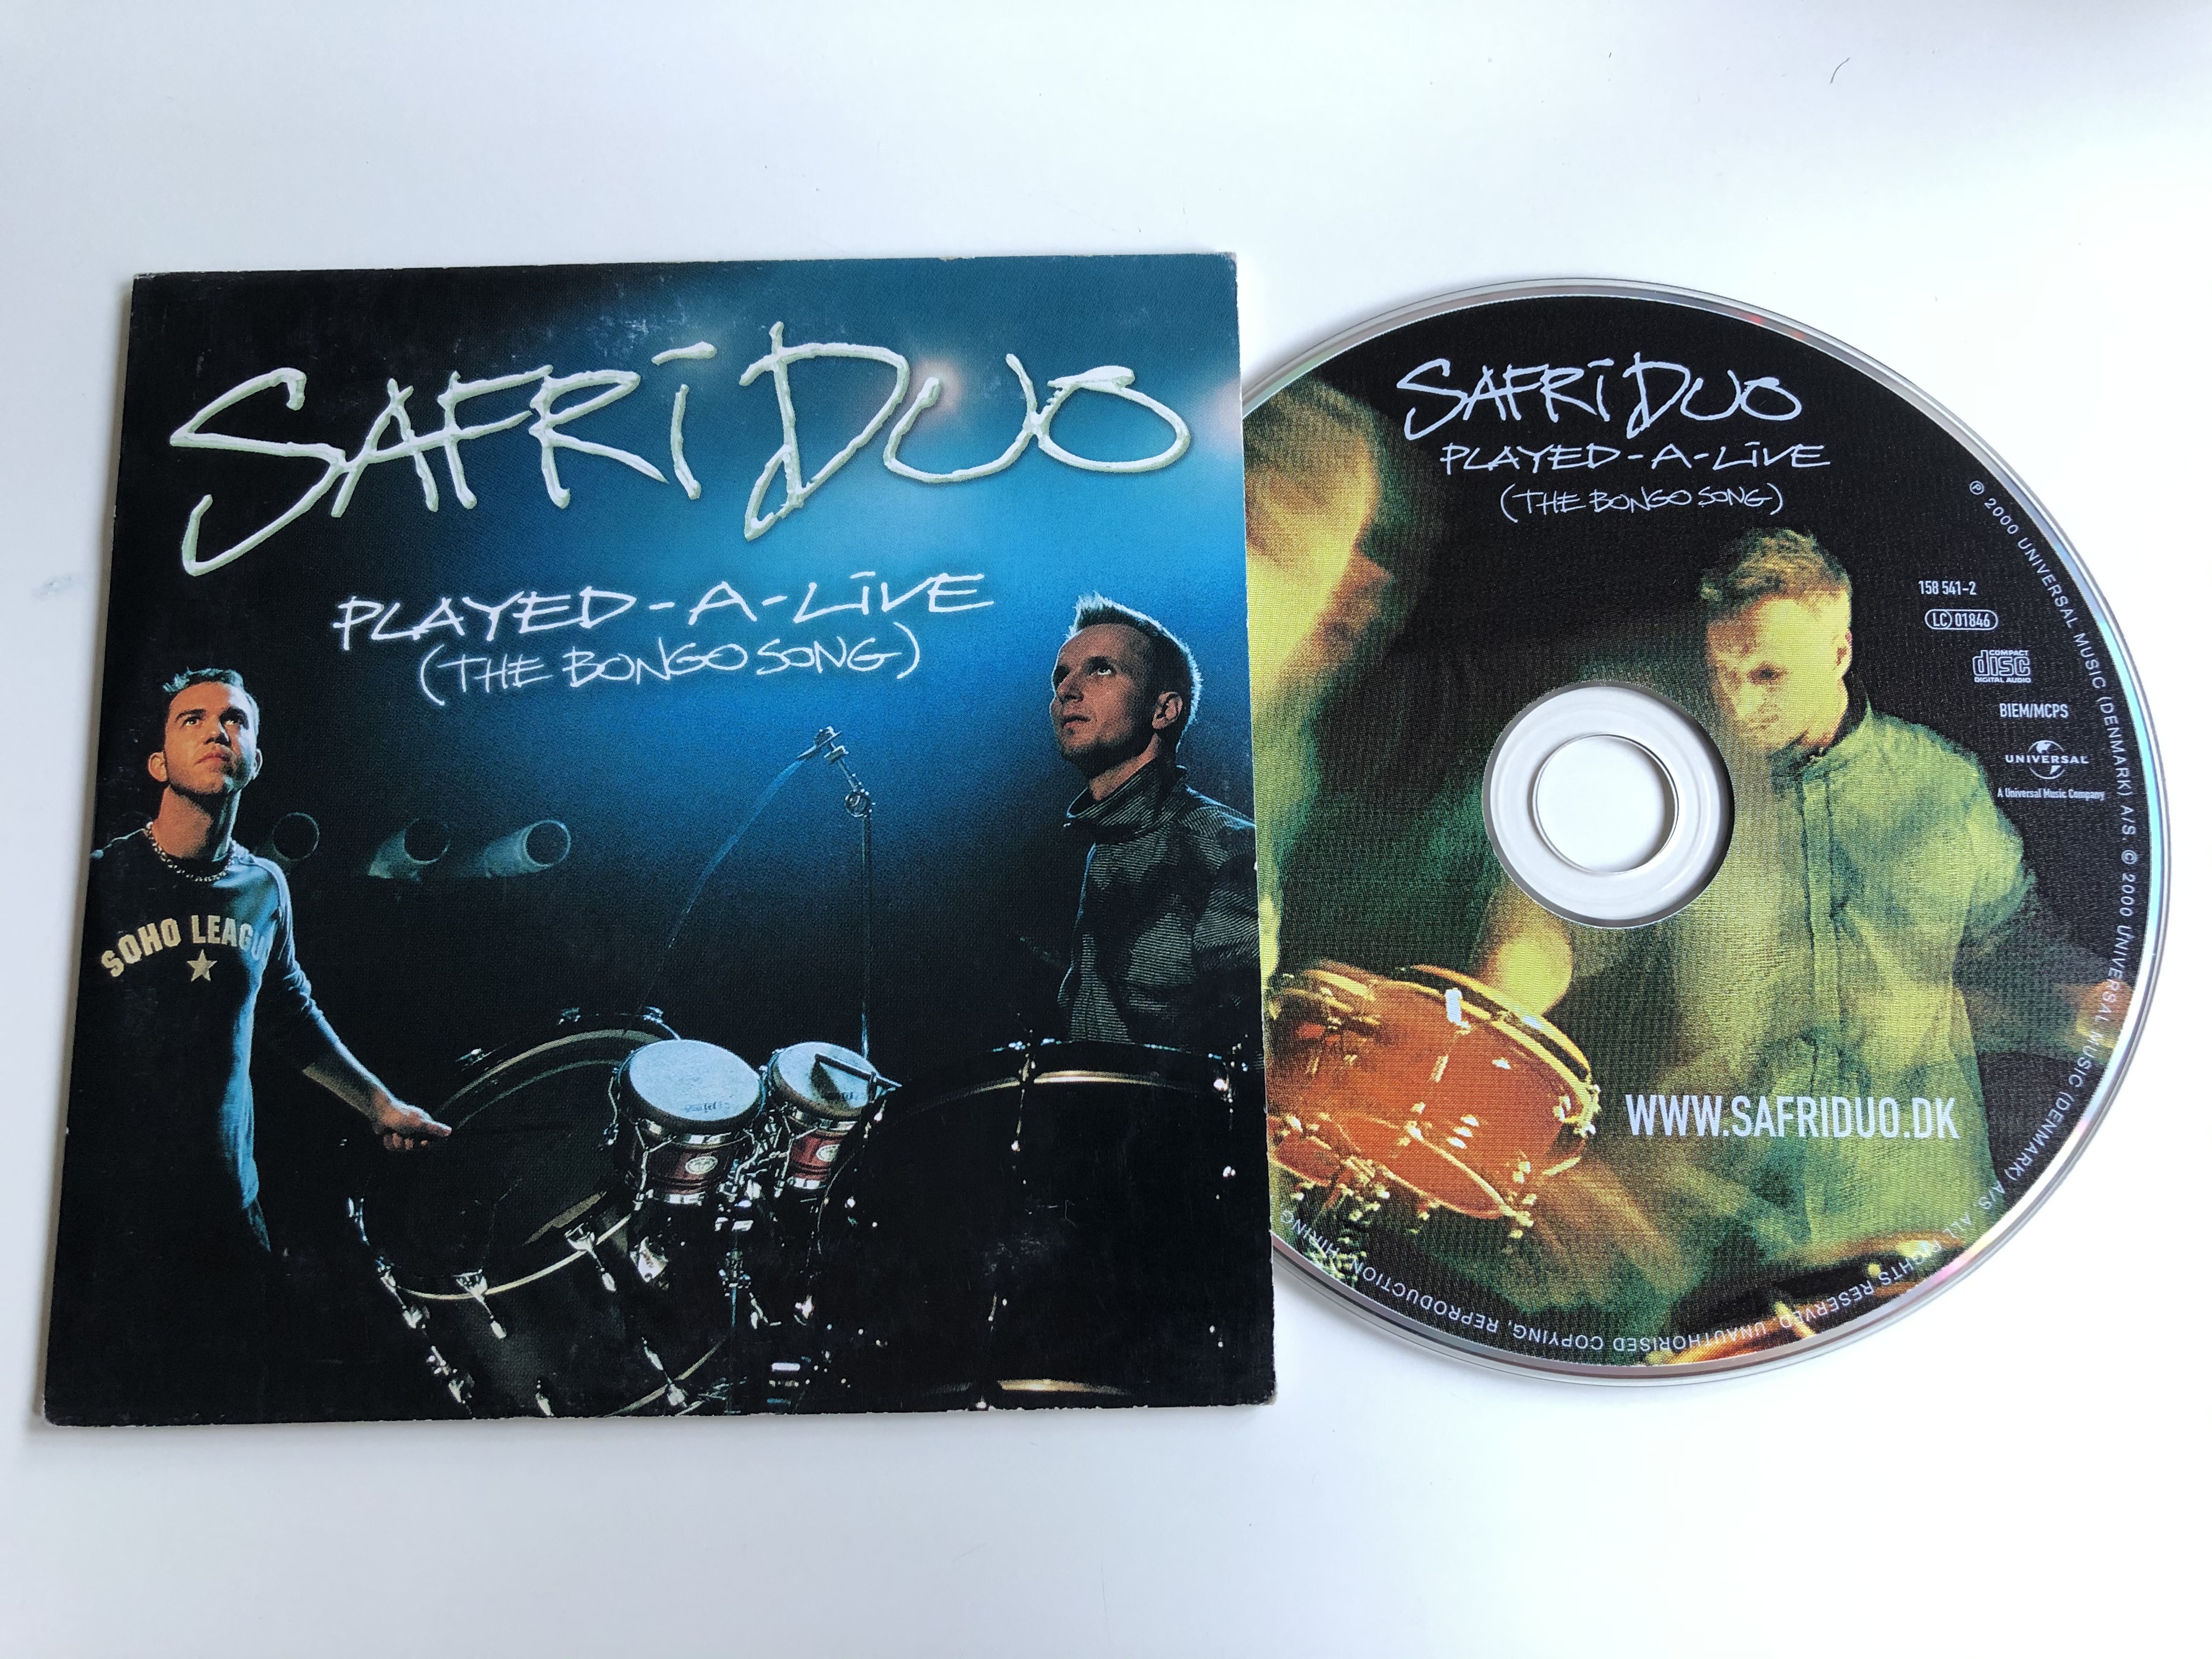 safri-duo-played-a-live-the-bongo-song-universal-audio-cd-2000-158-541-2-2-.jpg